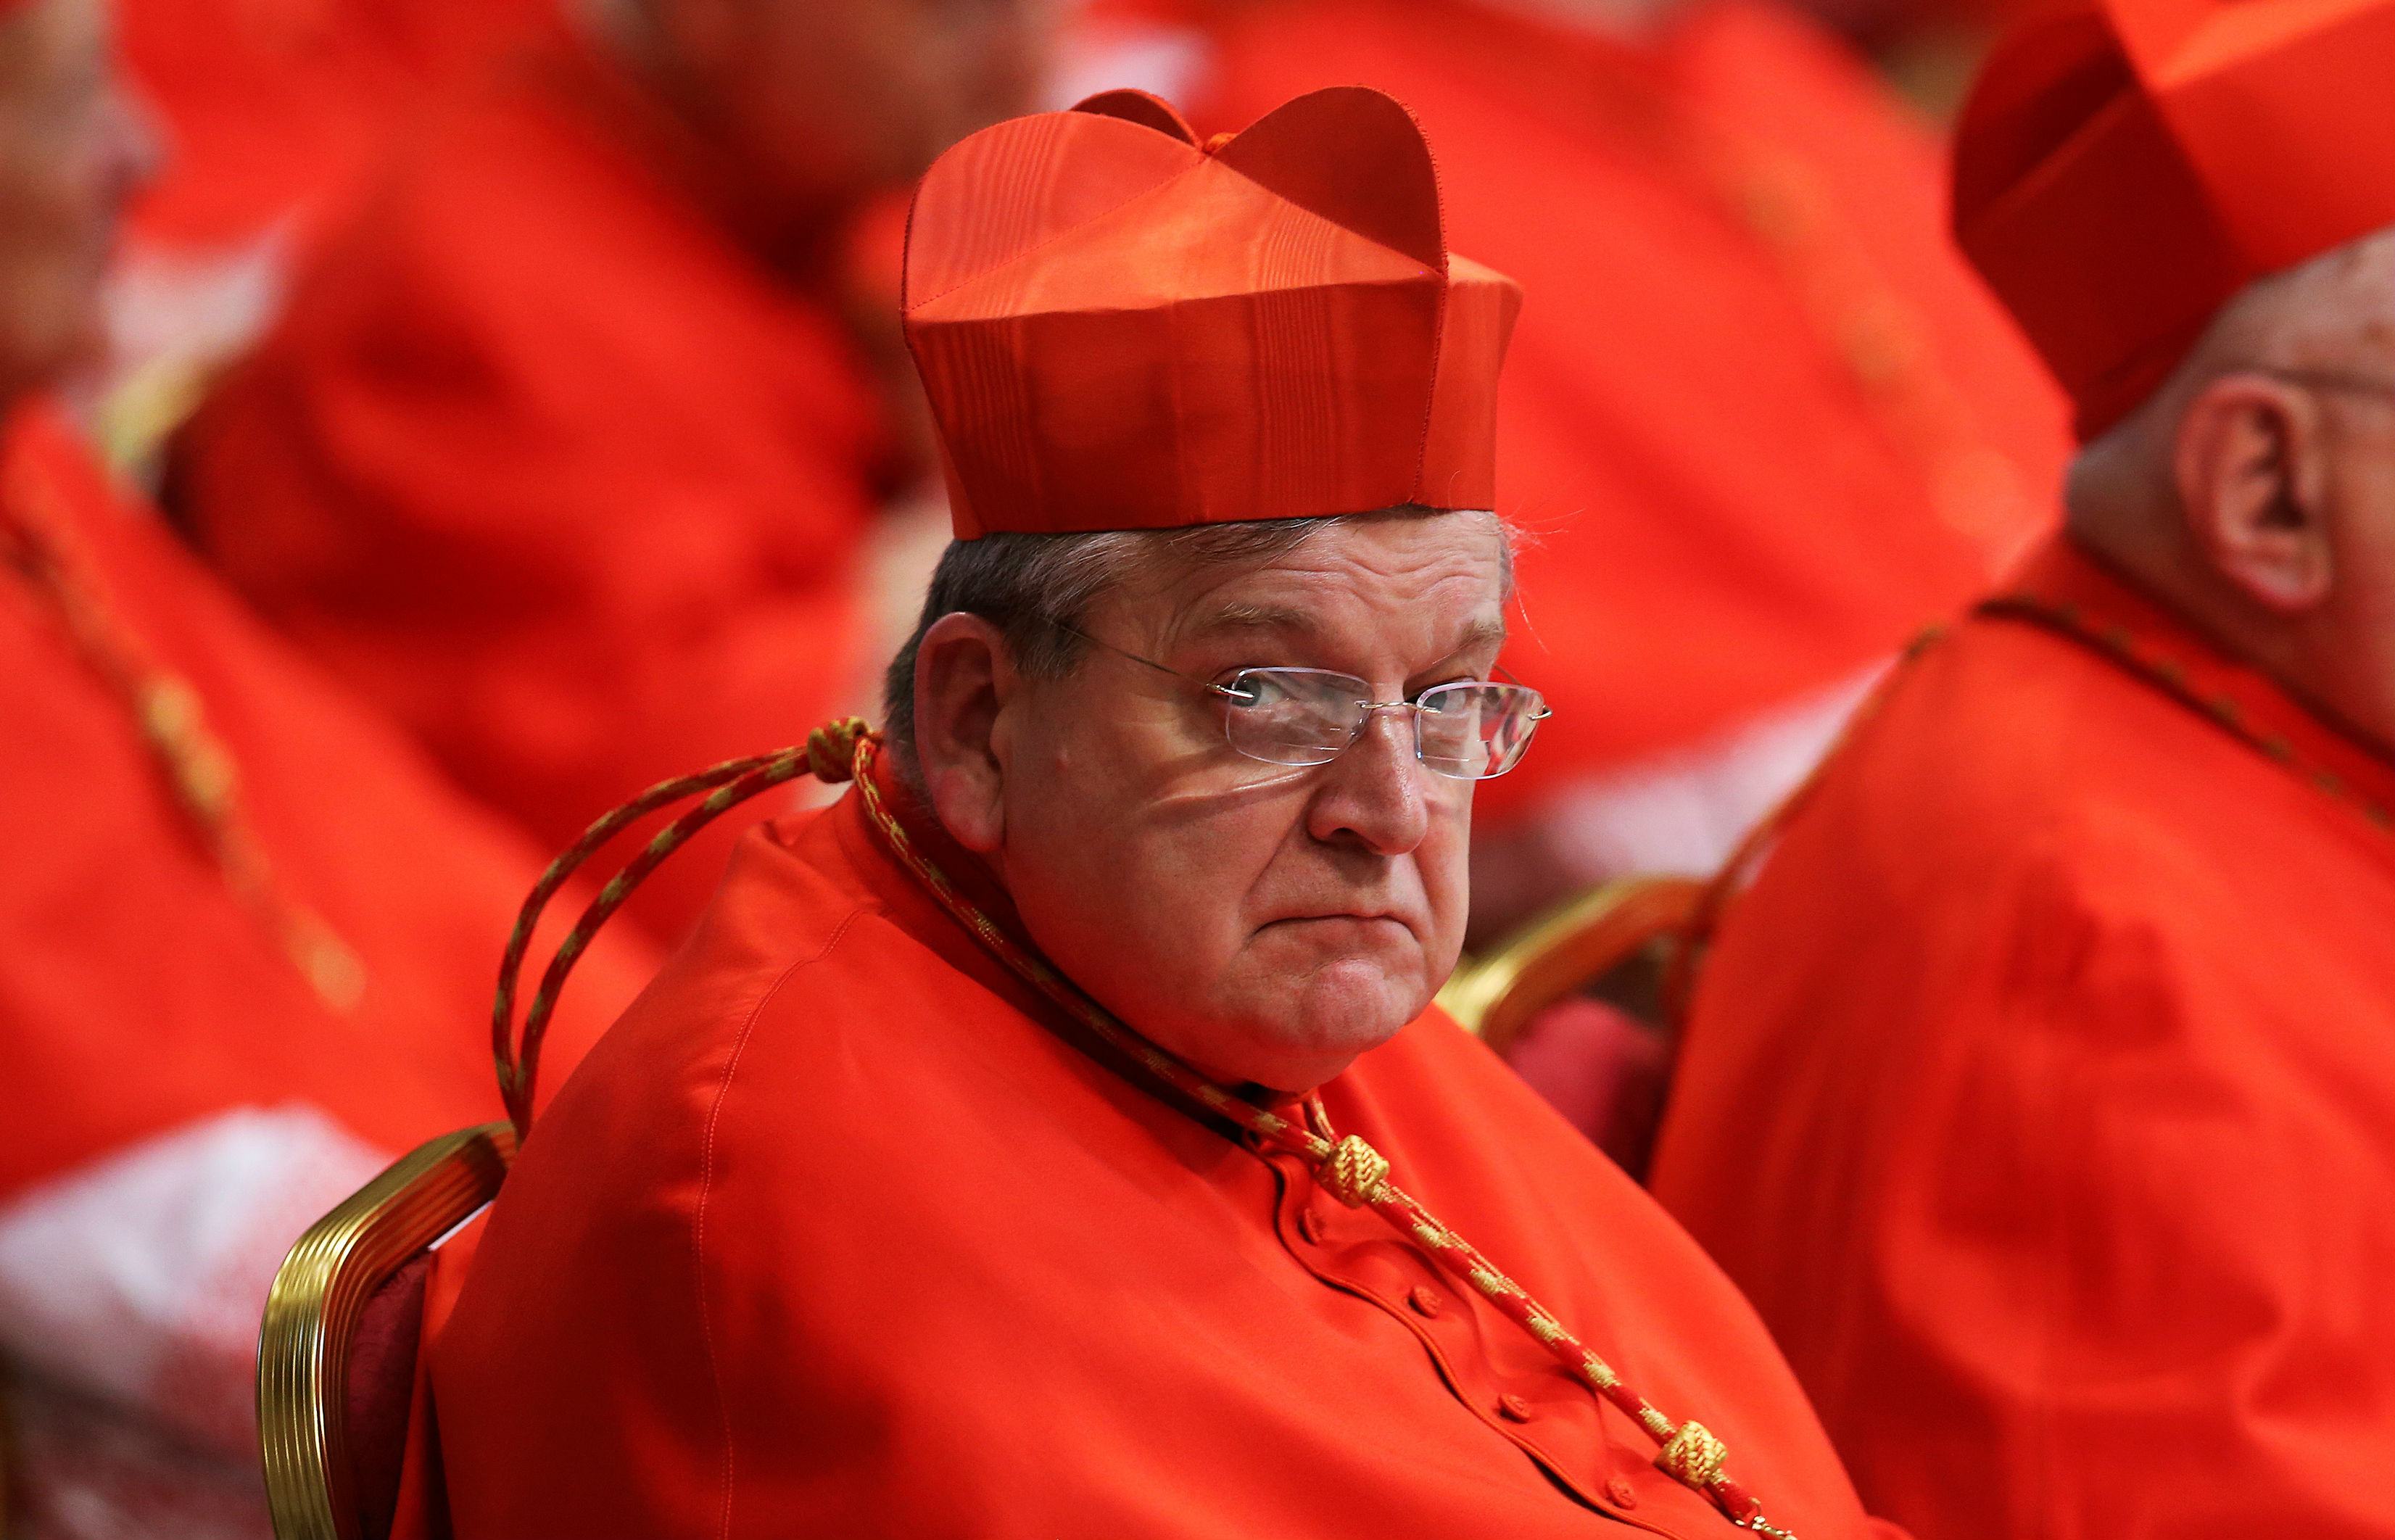 Relationship between pope and Cardinal a 'caricature' says Burke, but Catholics want clearer presentation of doctrine 